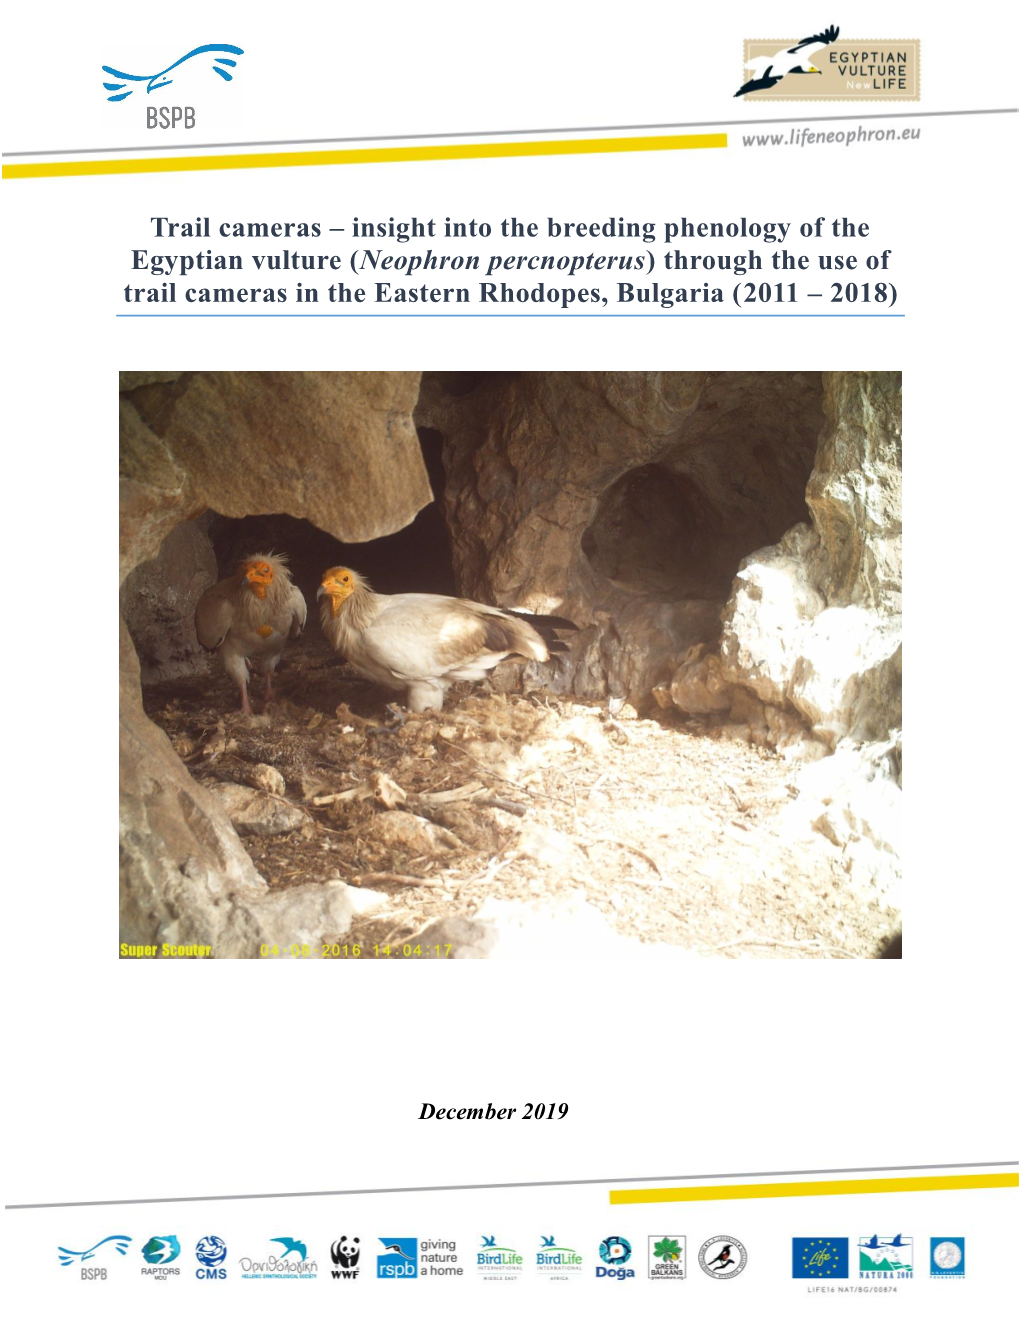 Neophron Percnopterus) Through the Use of Trail Cameras in the Eastern Rhodopes, Bulgaria (2011 – 2018